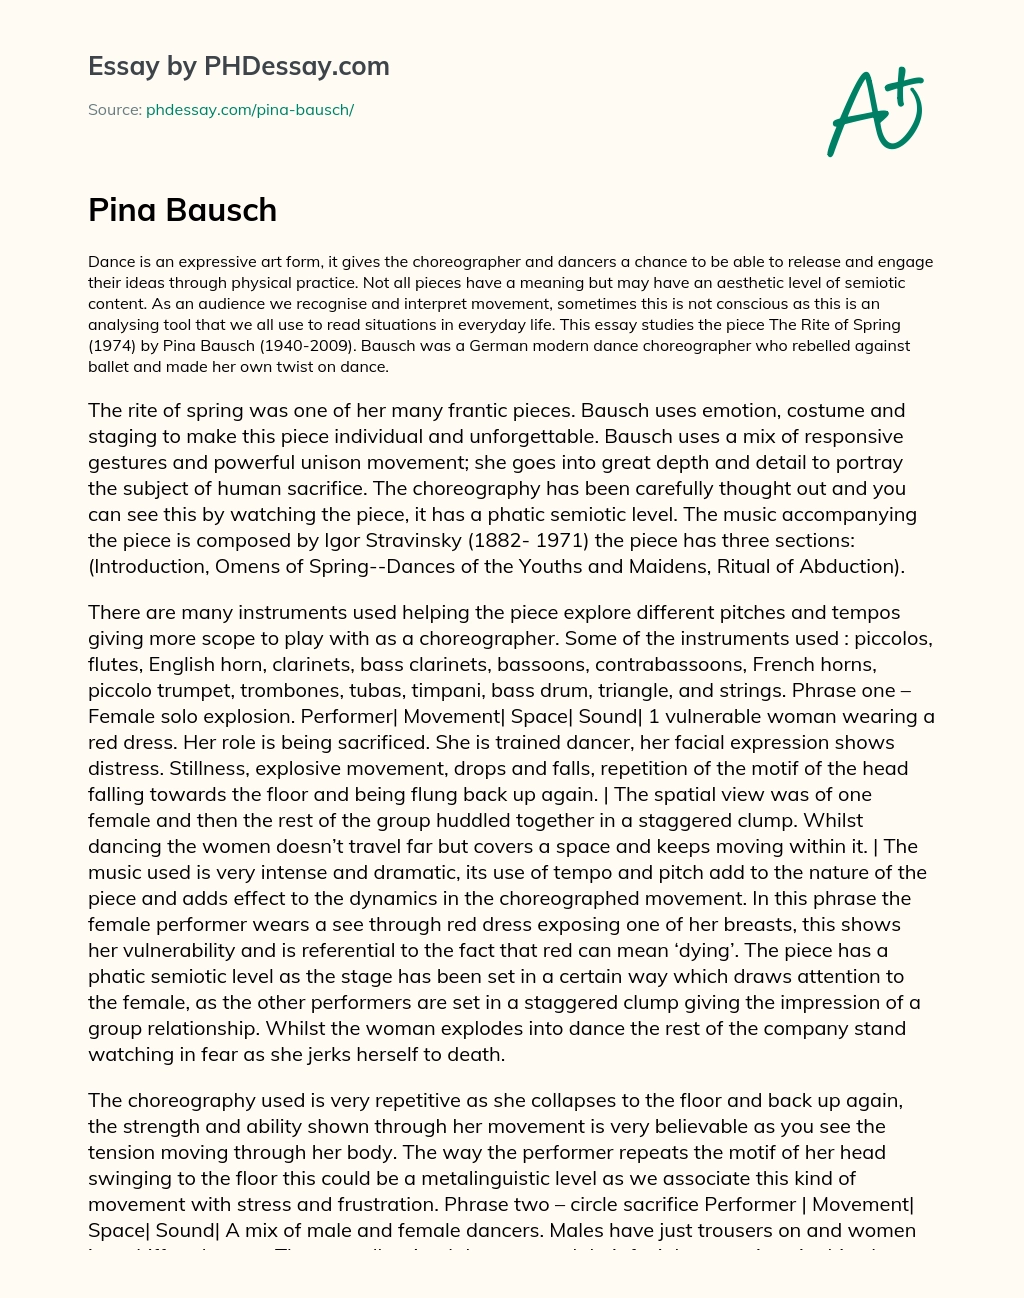 The Expressive Art of Dance: Analyzing Pina Bausch’s The Rite of Spring essay